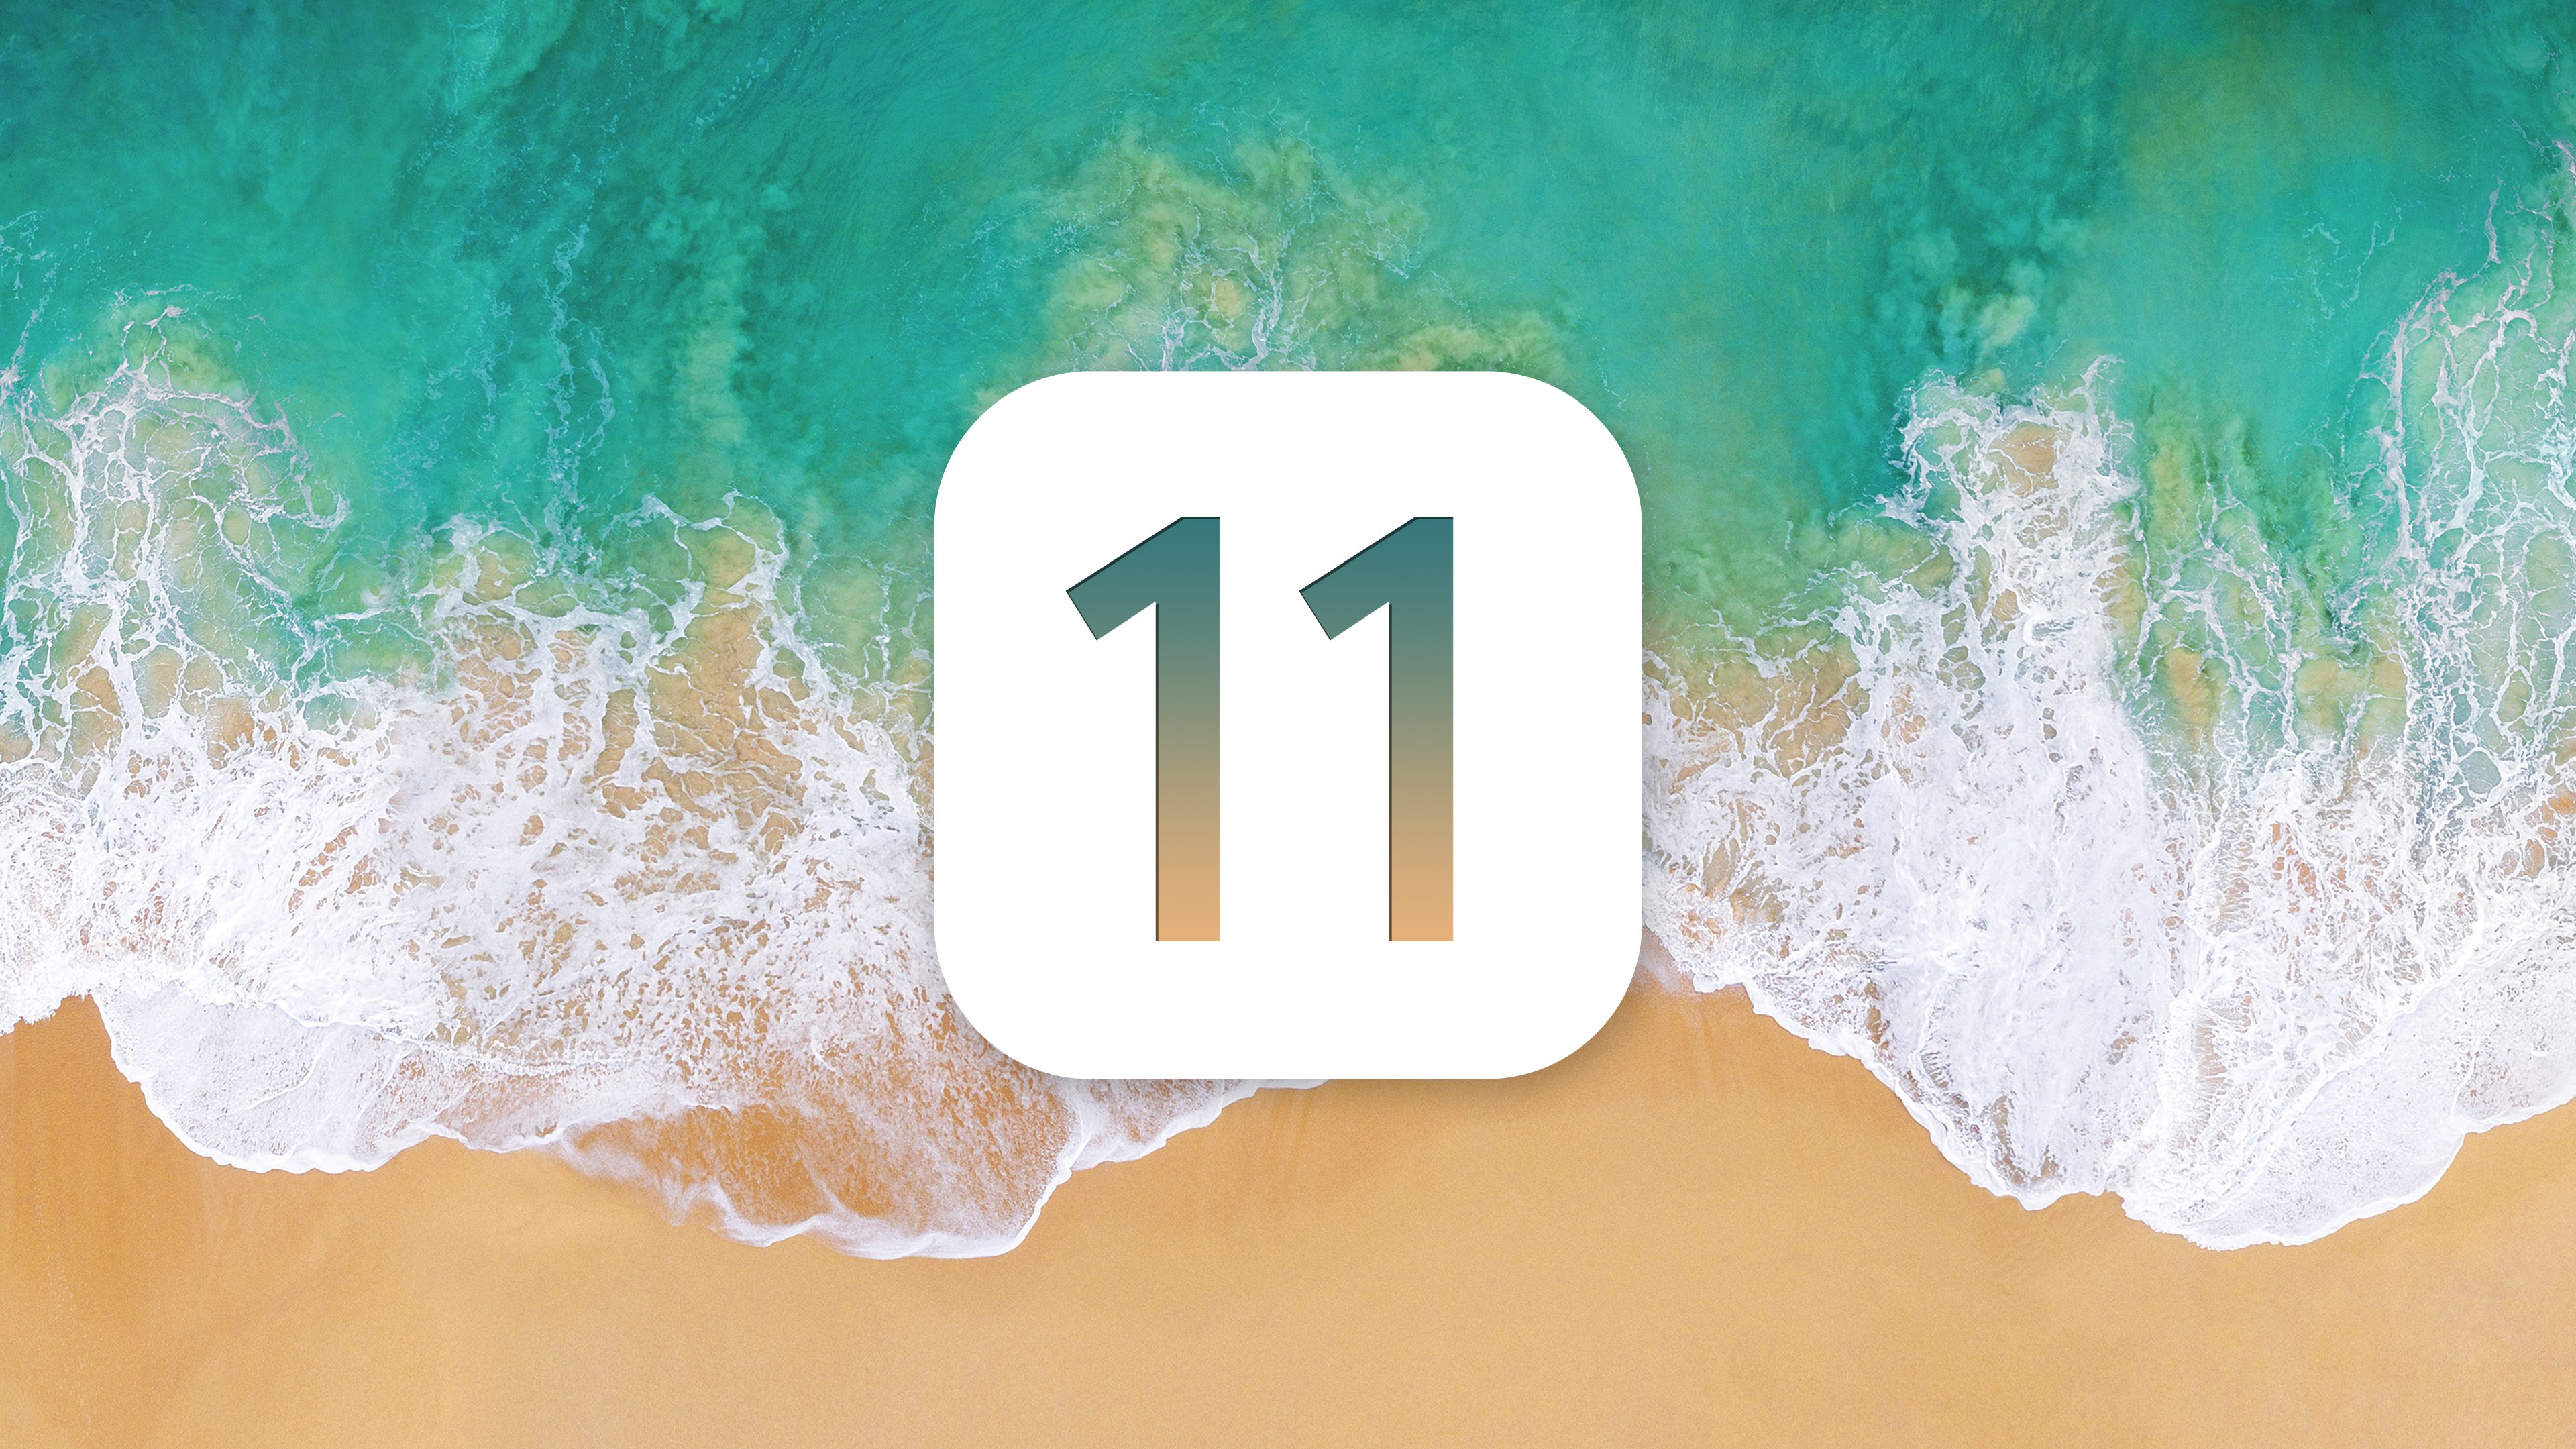 Download Free The New IOS 11 Iphone Hd Wallpaper for Desktop and Mobiles 4K  Ultra HD - HD Wallpaper 